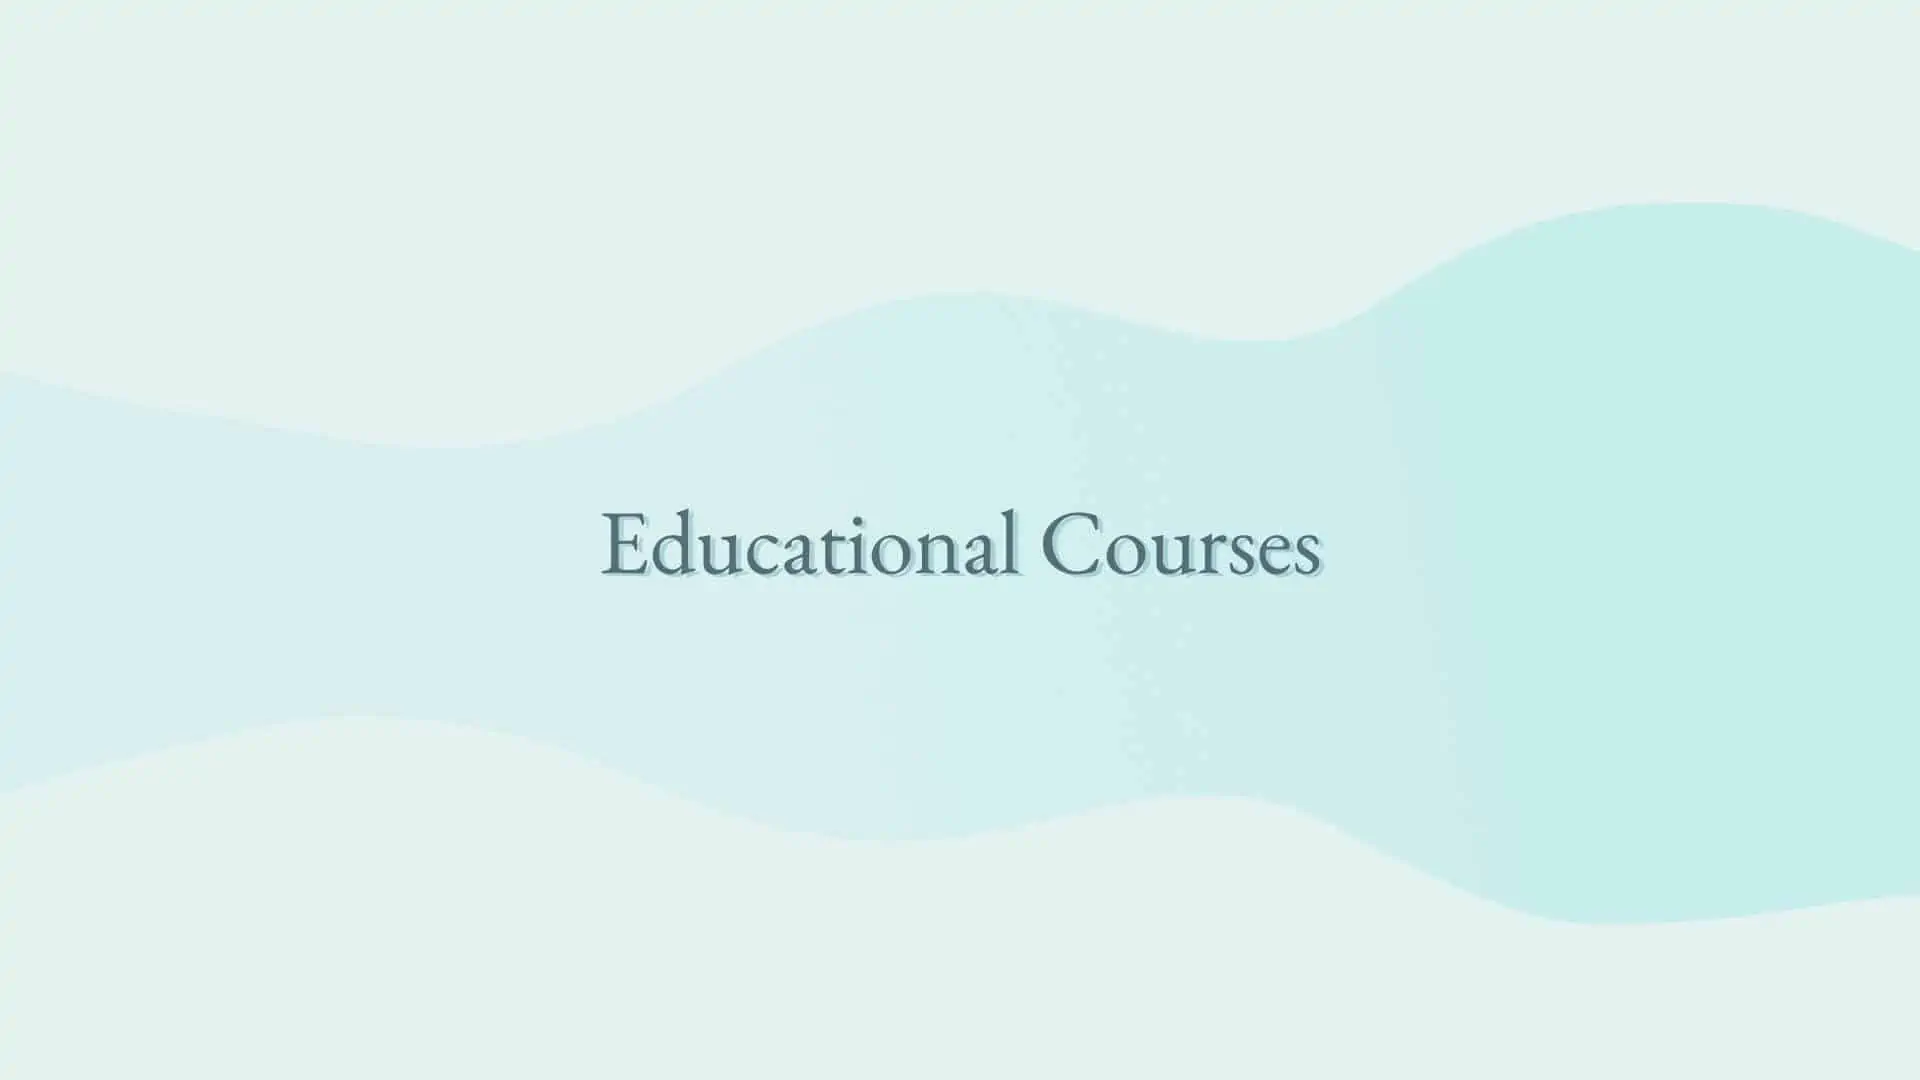 Educational Courses 8